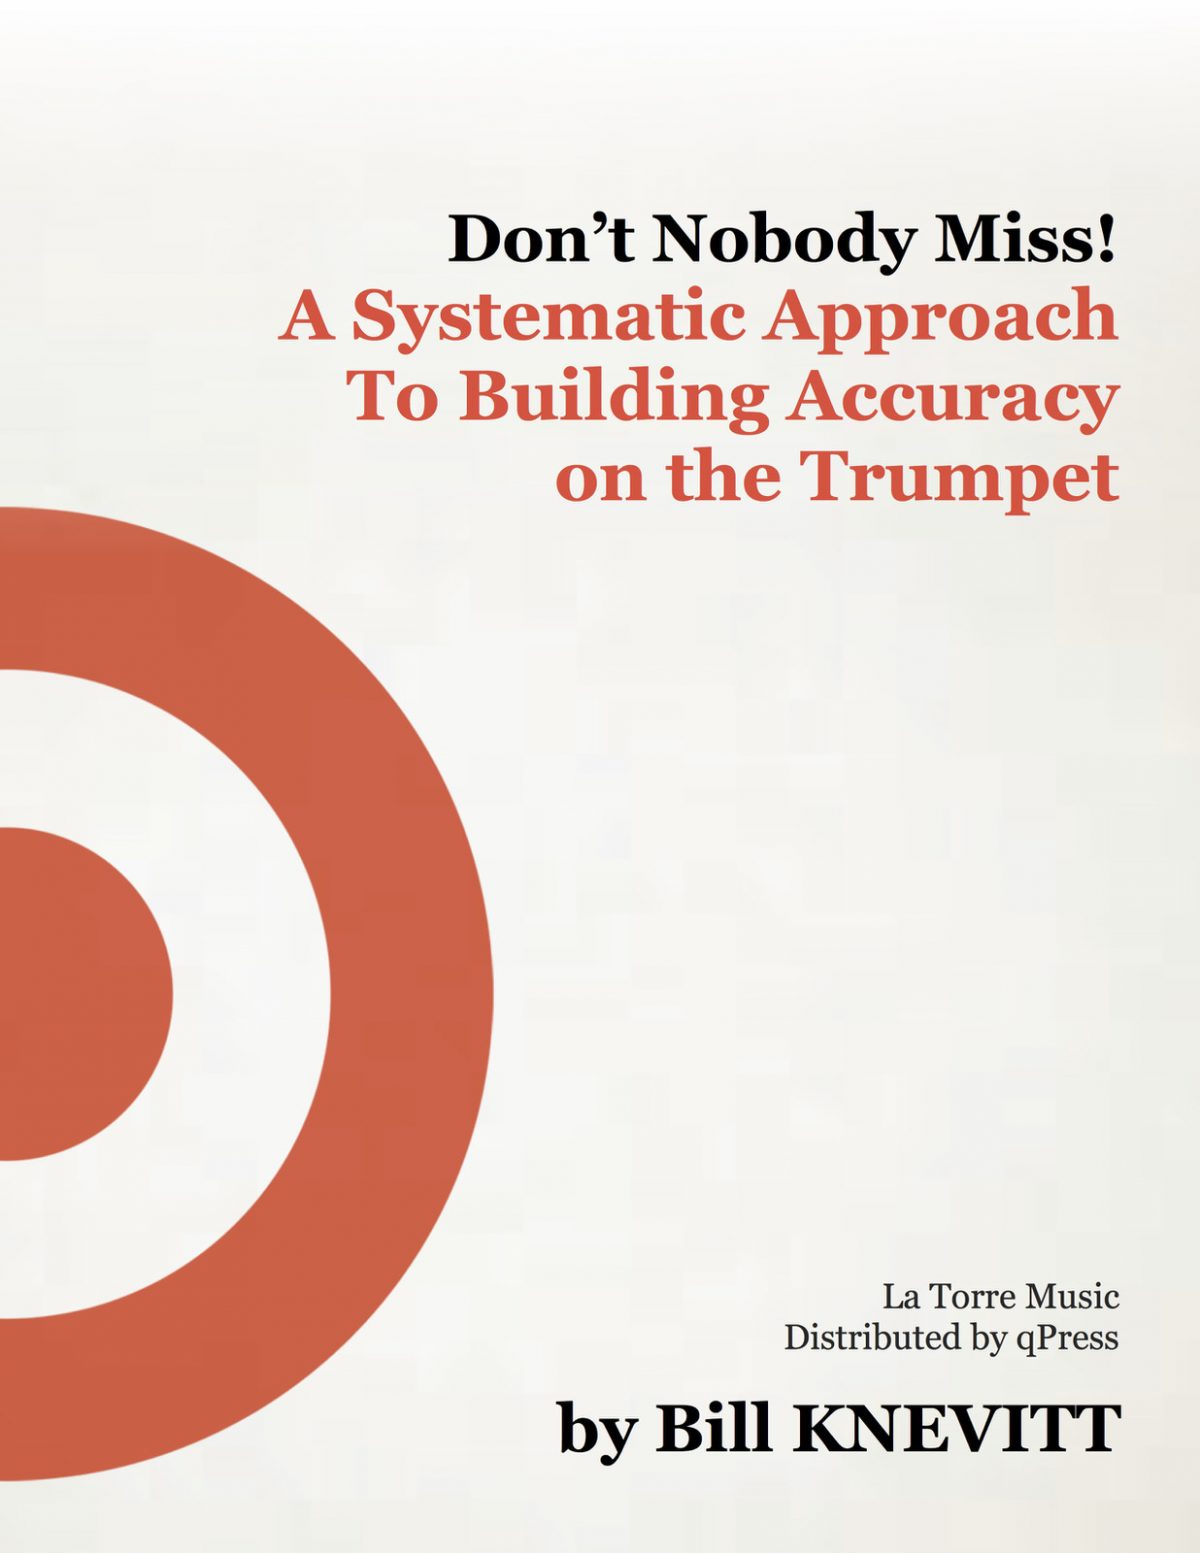 knevitt-dont-nobody-miss-a-systematic-approach-to-building-accuracy-on-trumpet